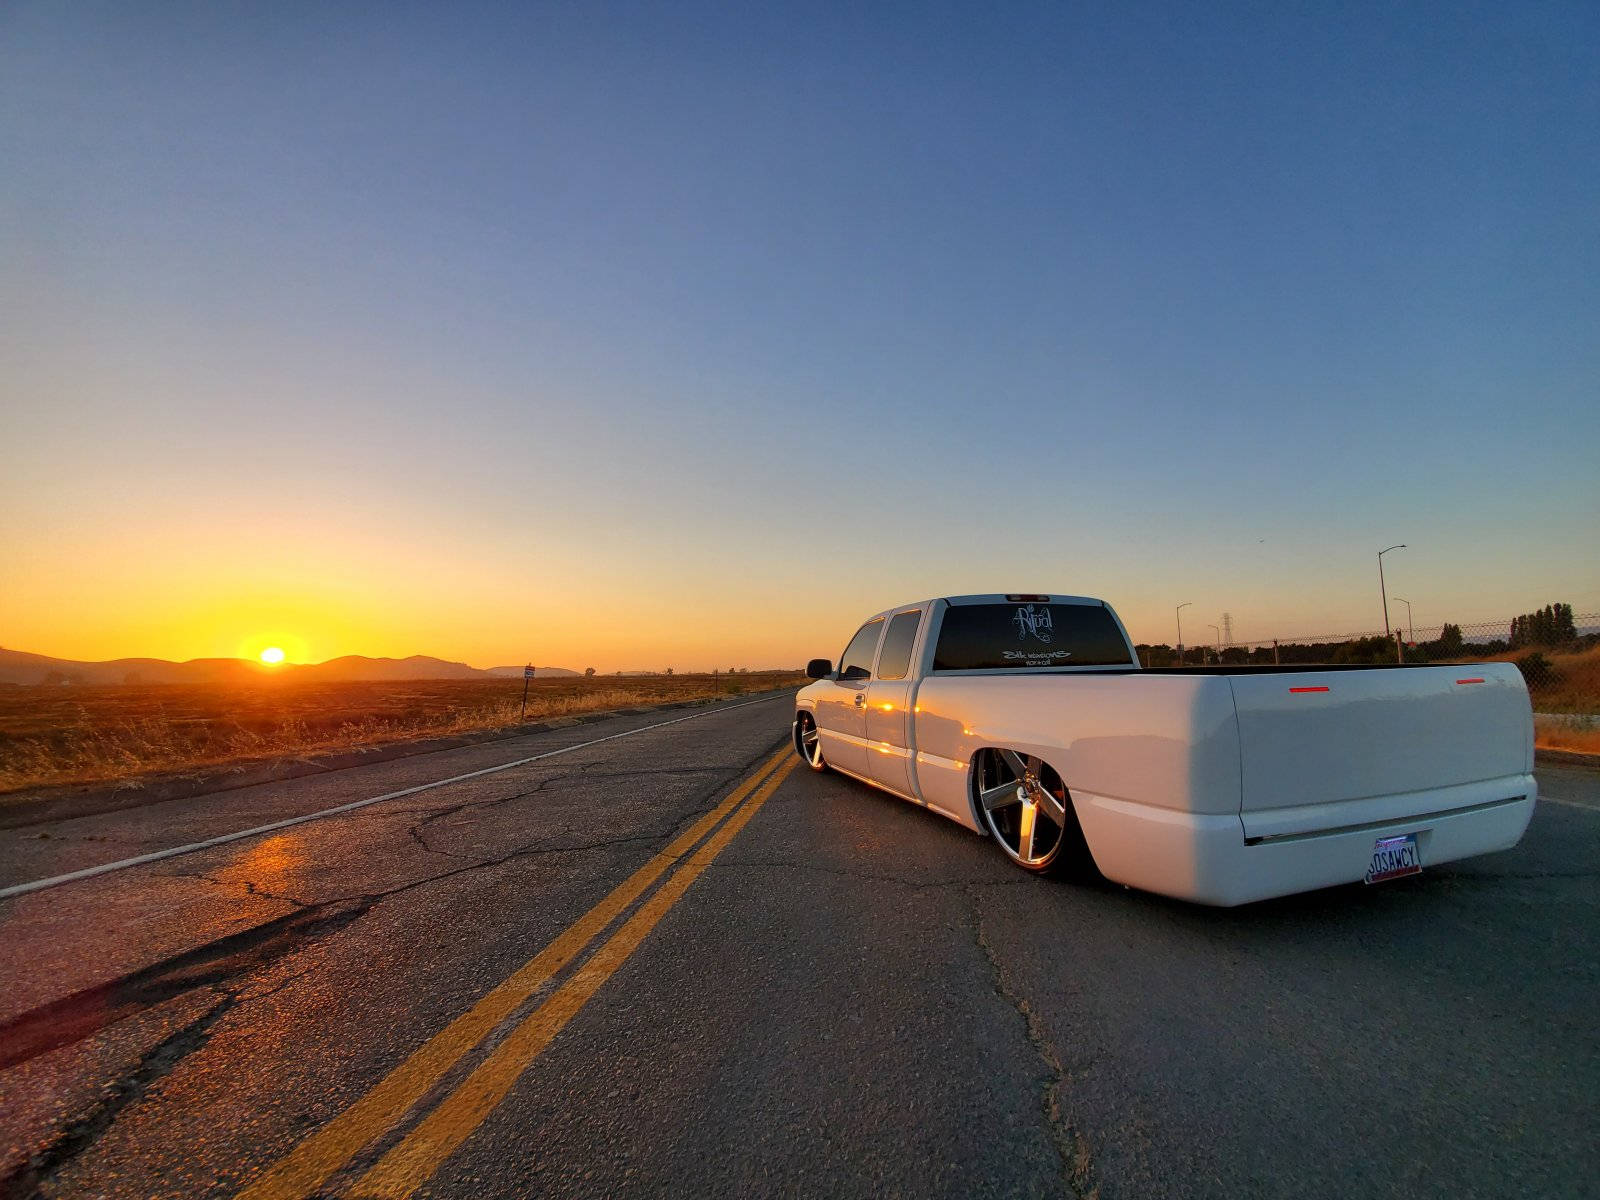 Dropped Truck During Sunset Background